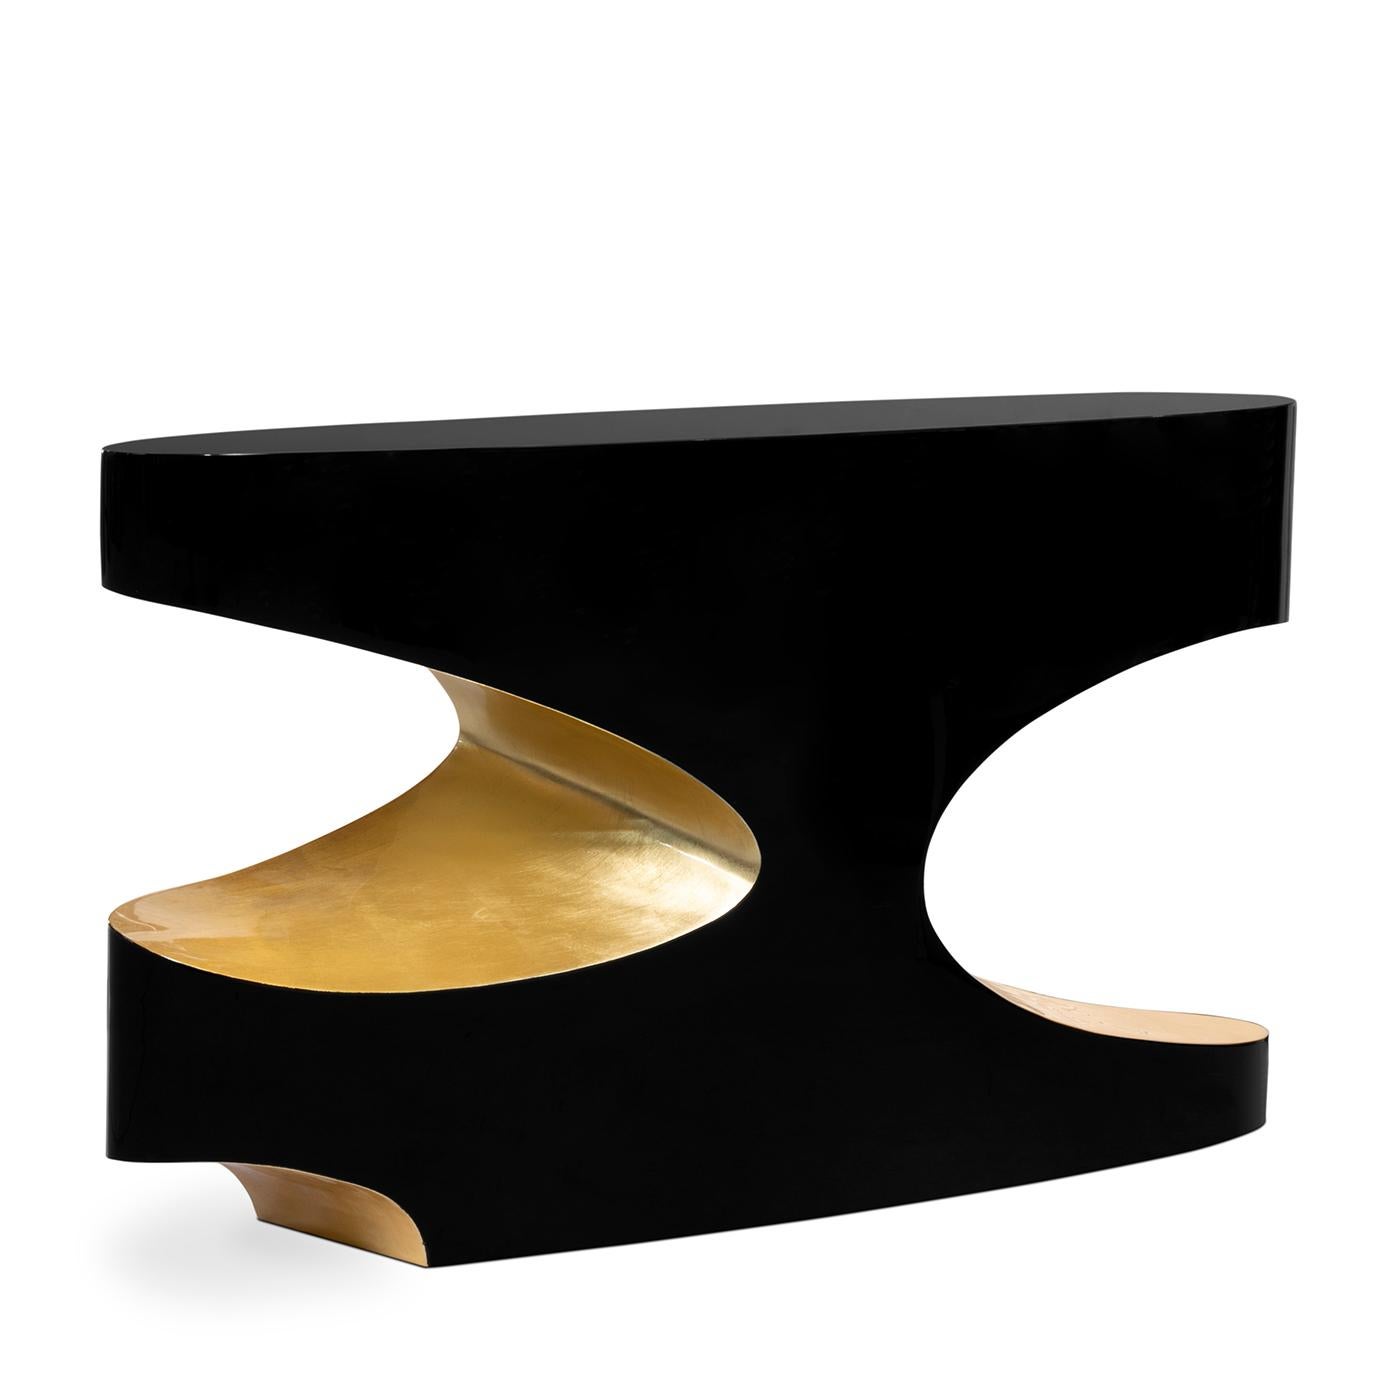 Console table Vadis with wooden structure in 
black lacquered finish and with gold leaf finish.